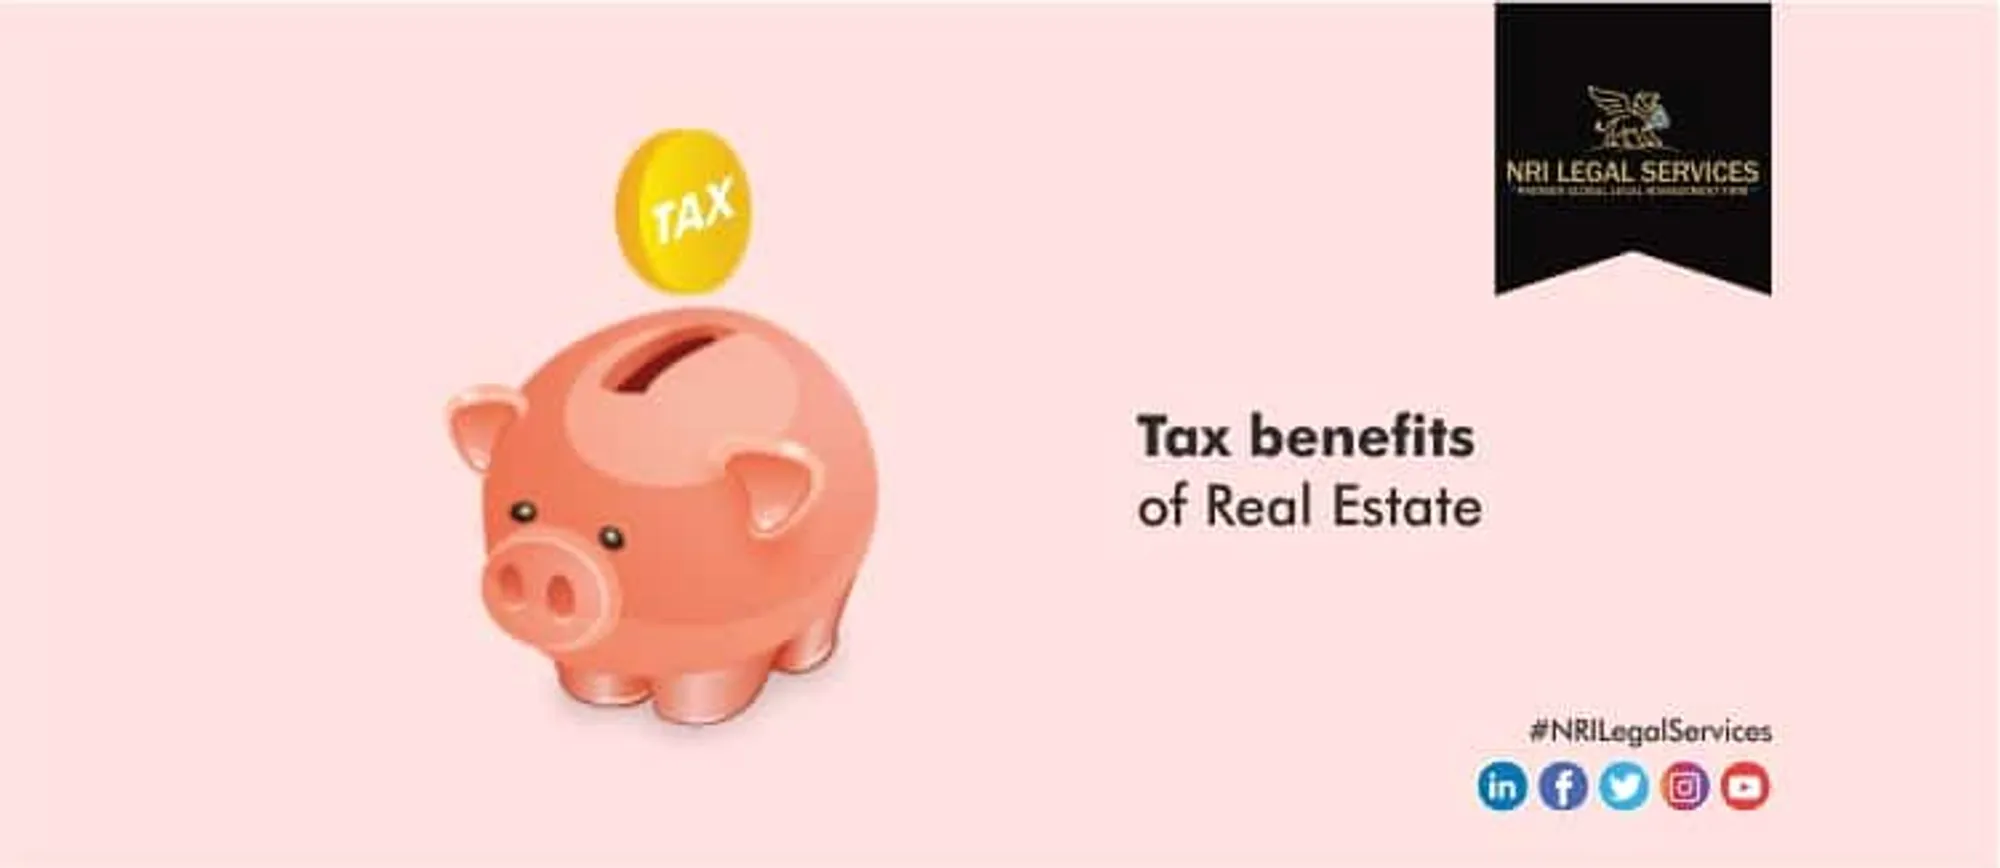 Tax benefits of Real Estate